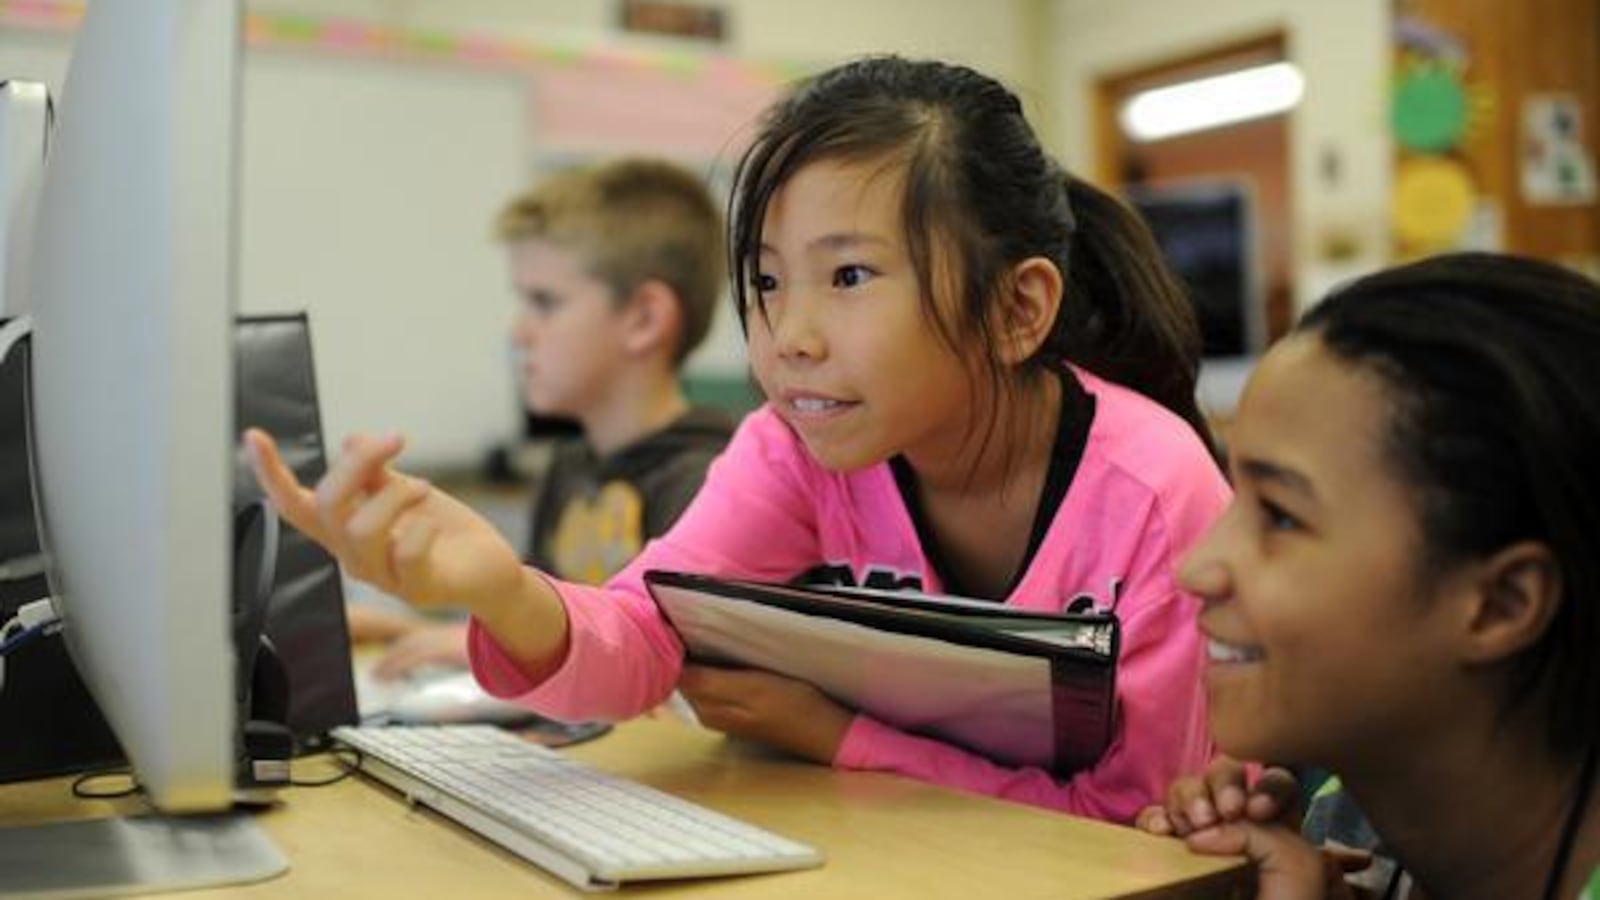 Lucky Bayar, 8, left, and Tanya Pezin, 11, check their computer project at Ellis Elementary School.